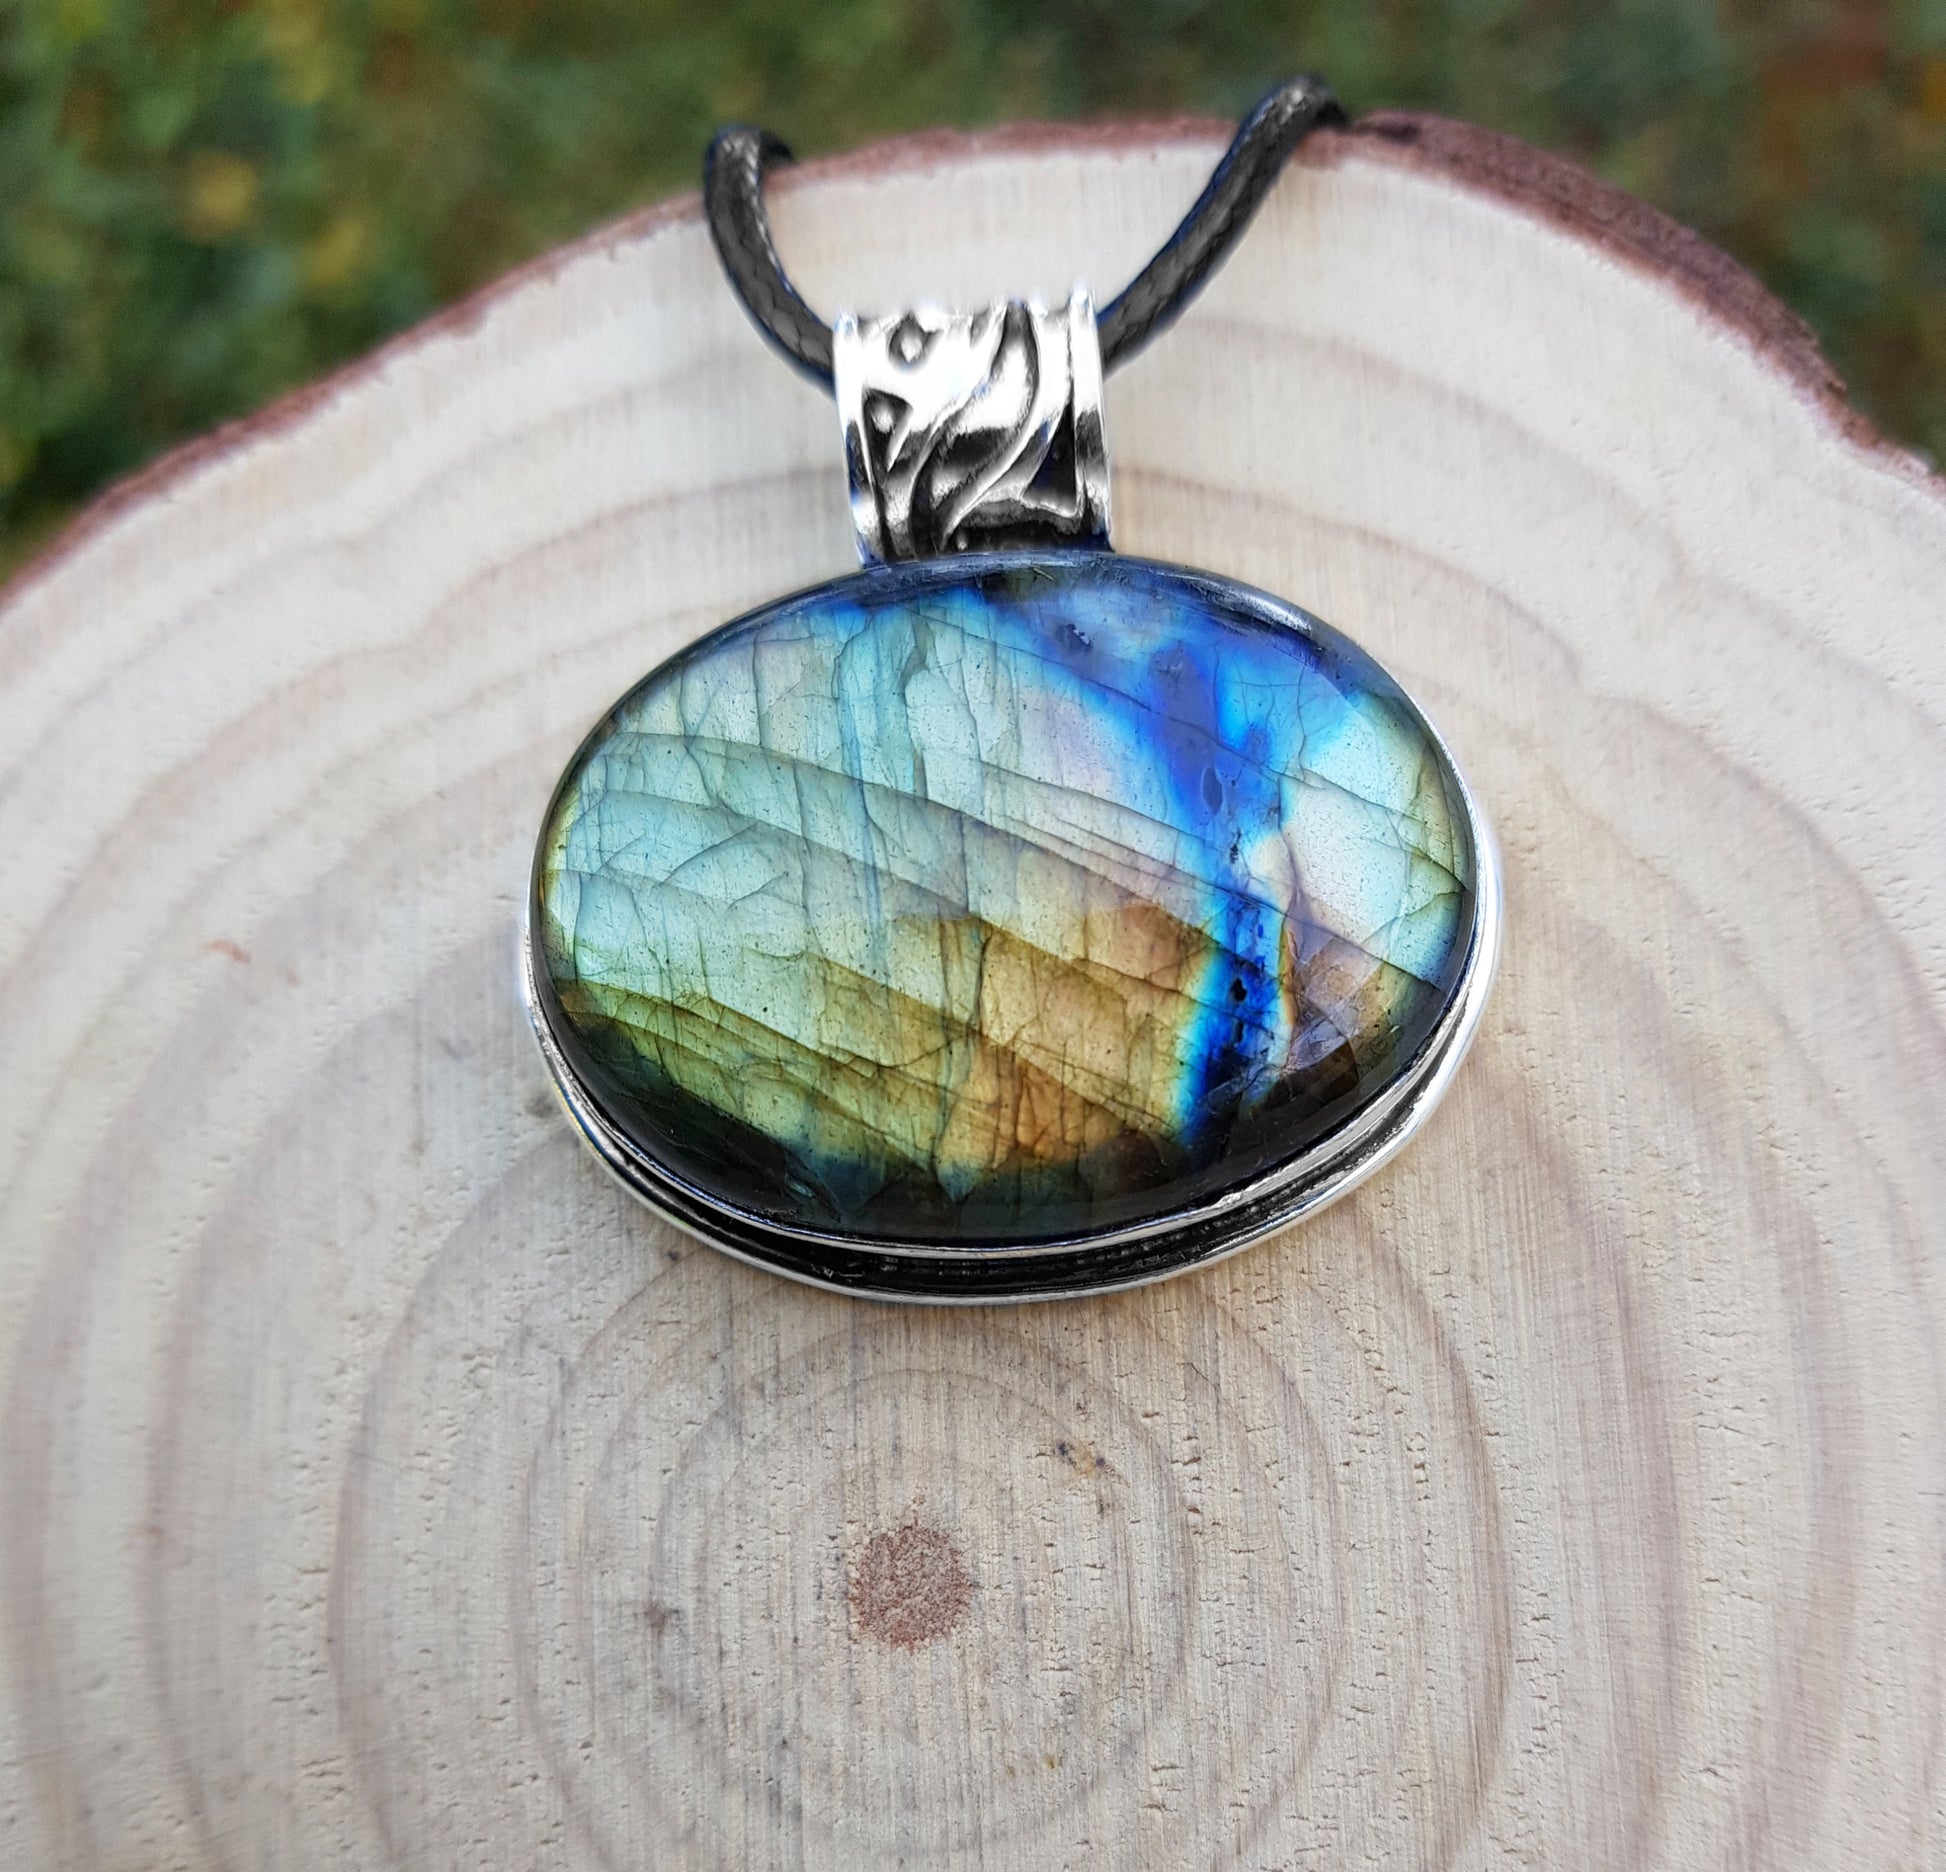 Top Grade Labradorite Necklace Sterling Silver Gemstone Pendant Boho Necklace Unique Gift One Of A Kind Jewelry